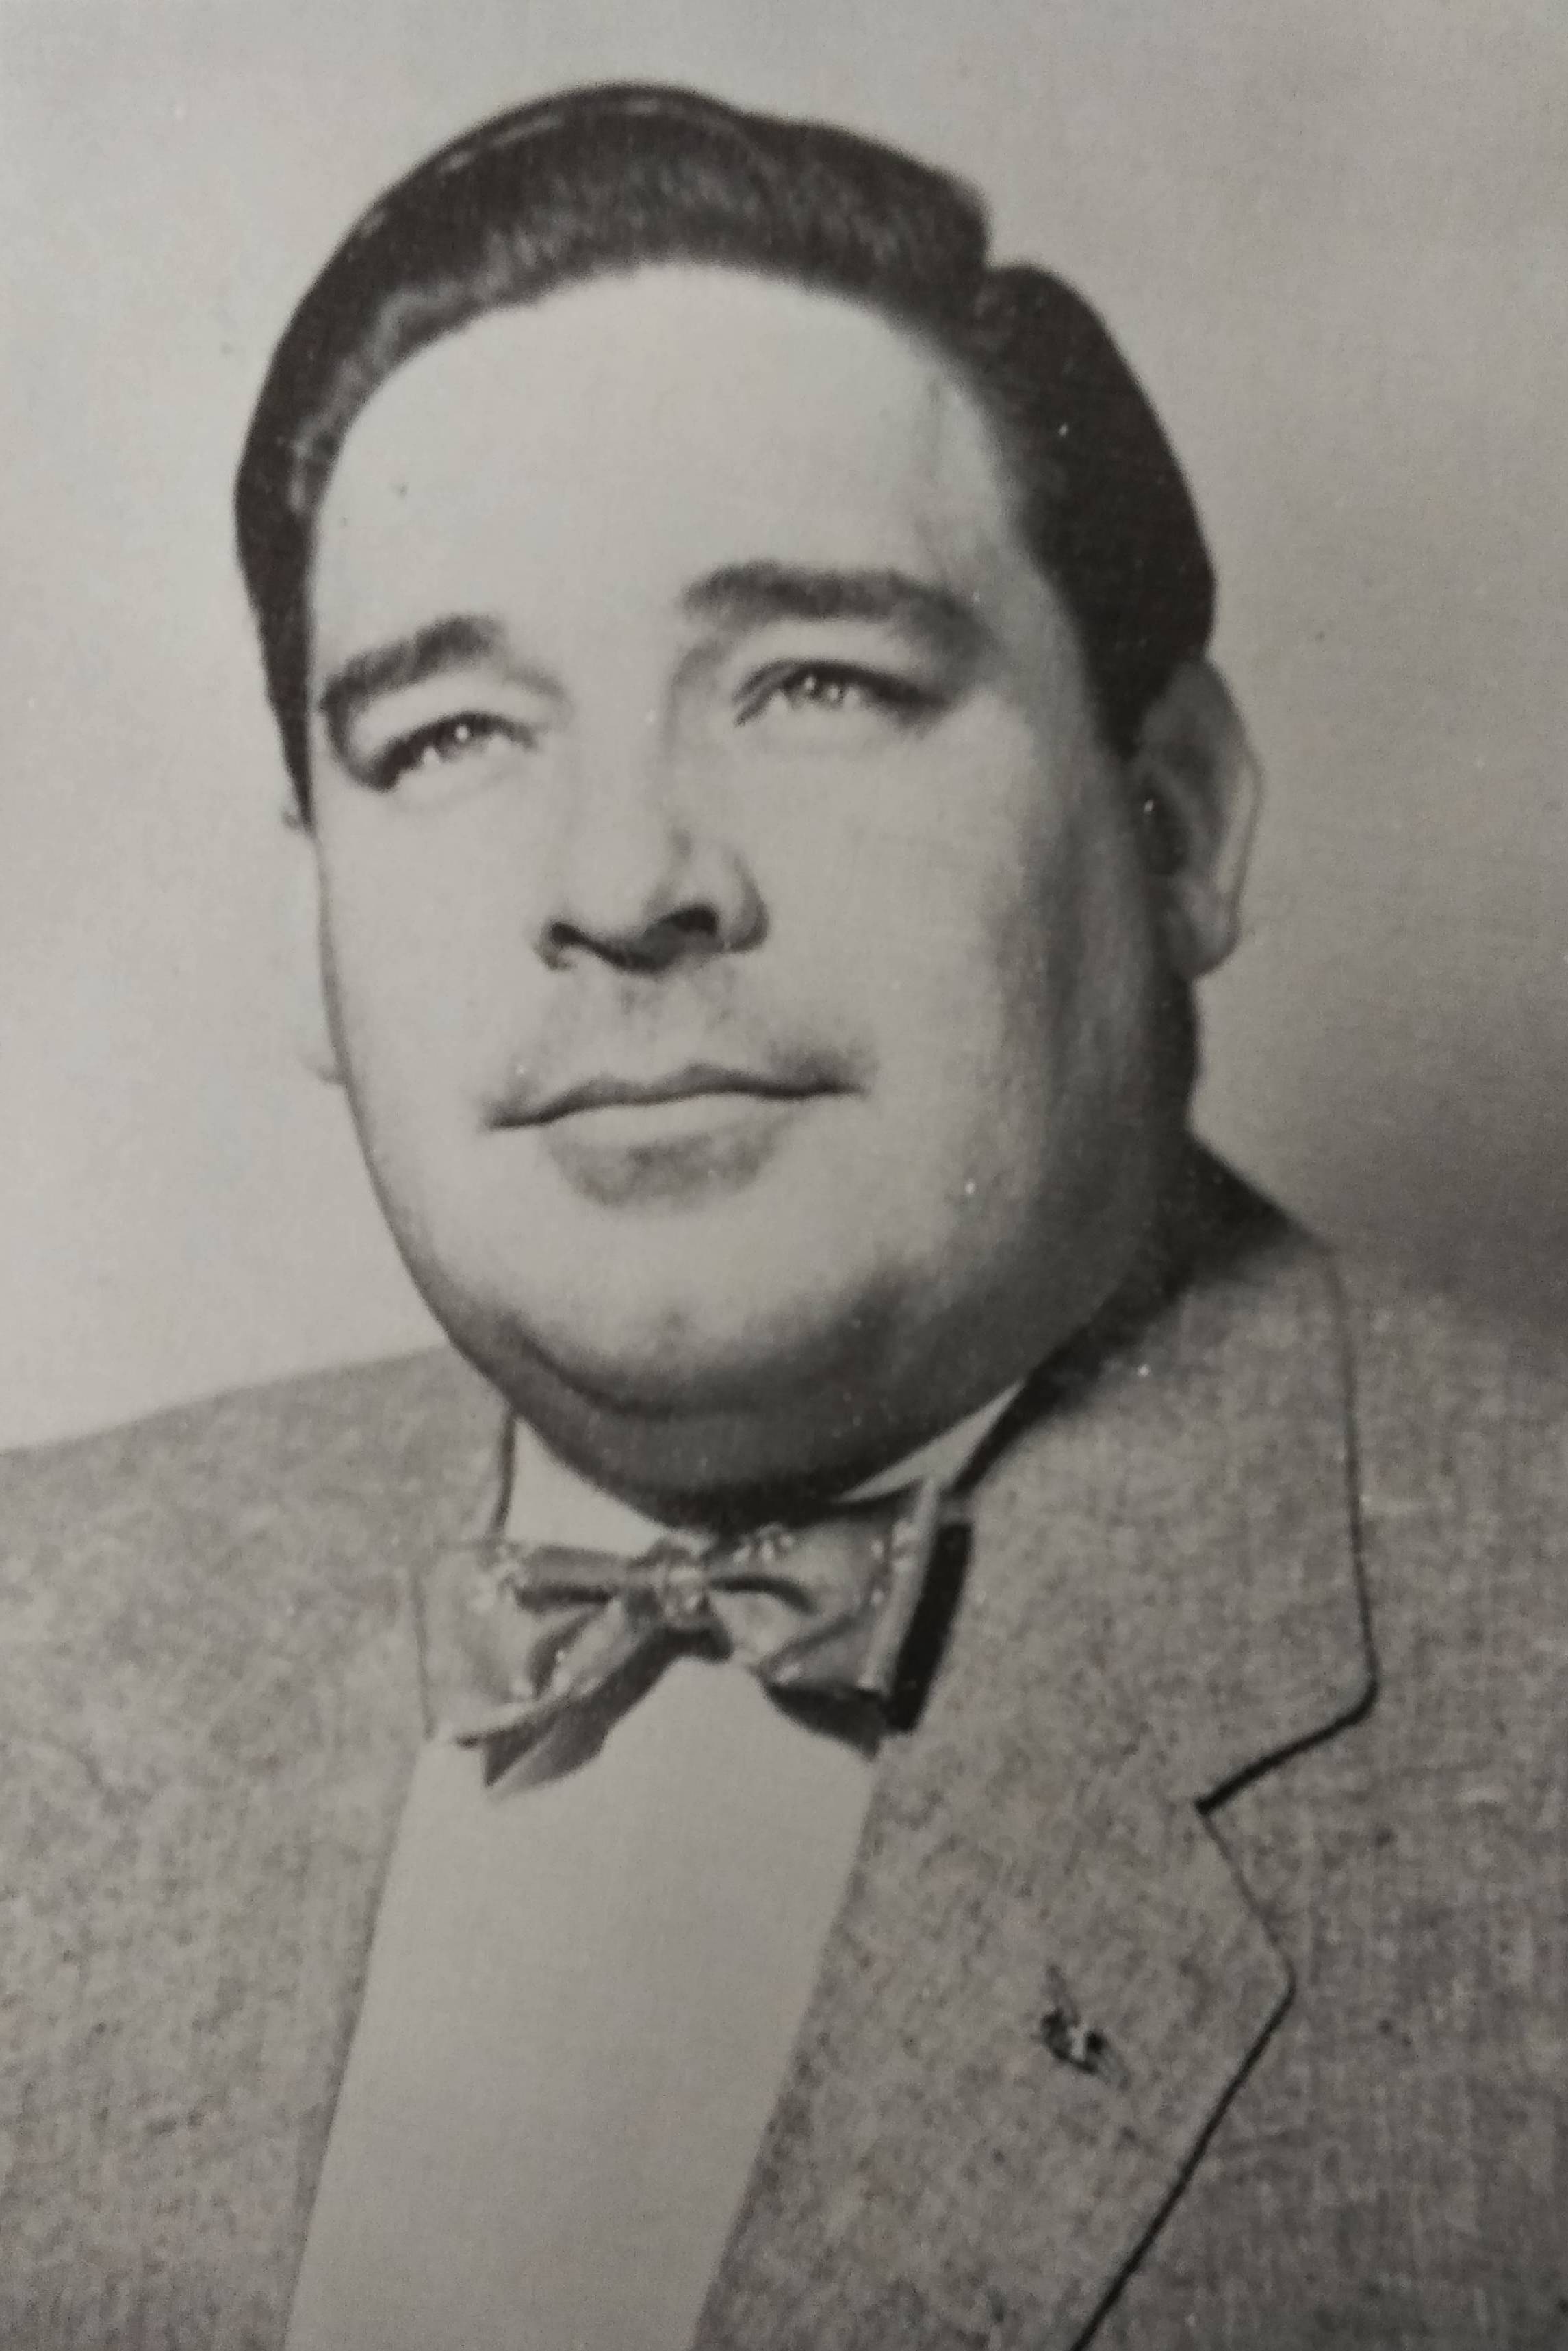 Picture of Carl Kusick approximately 1952.